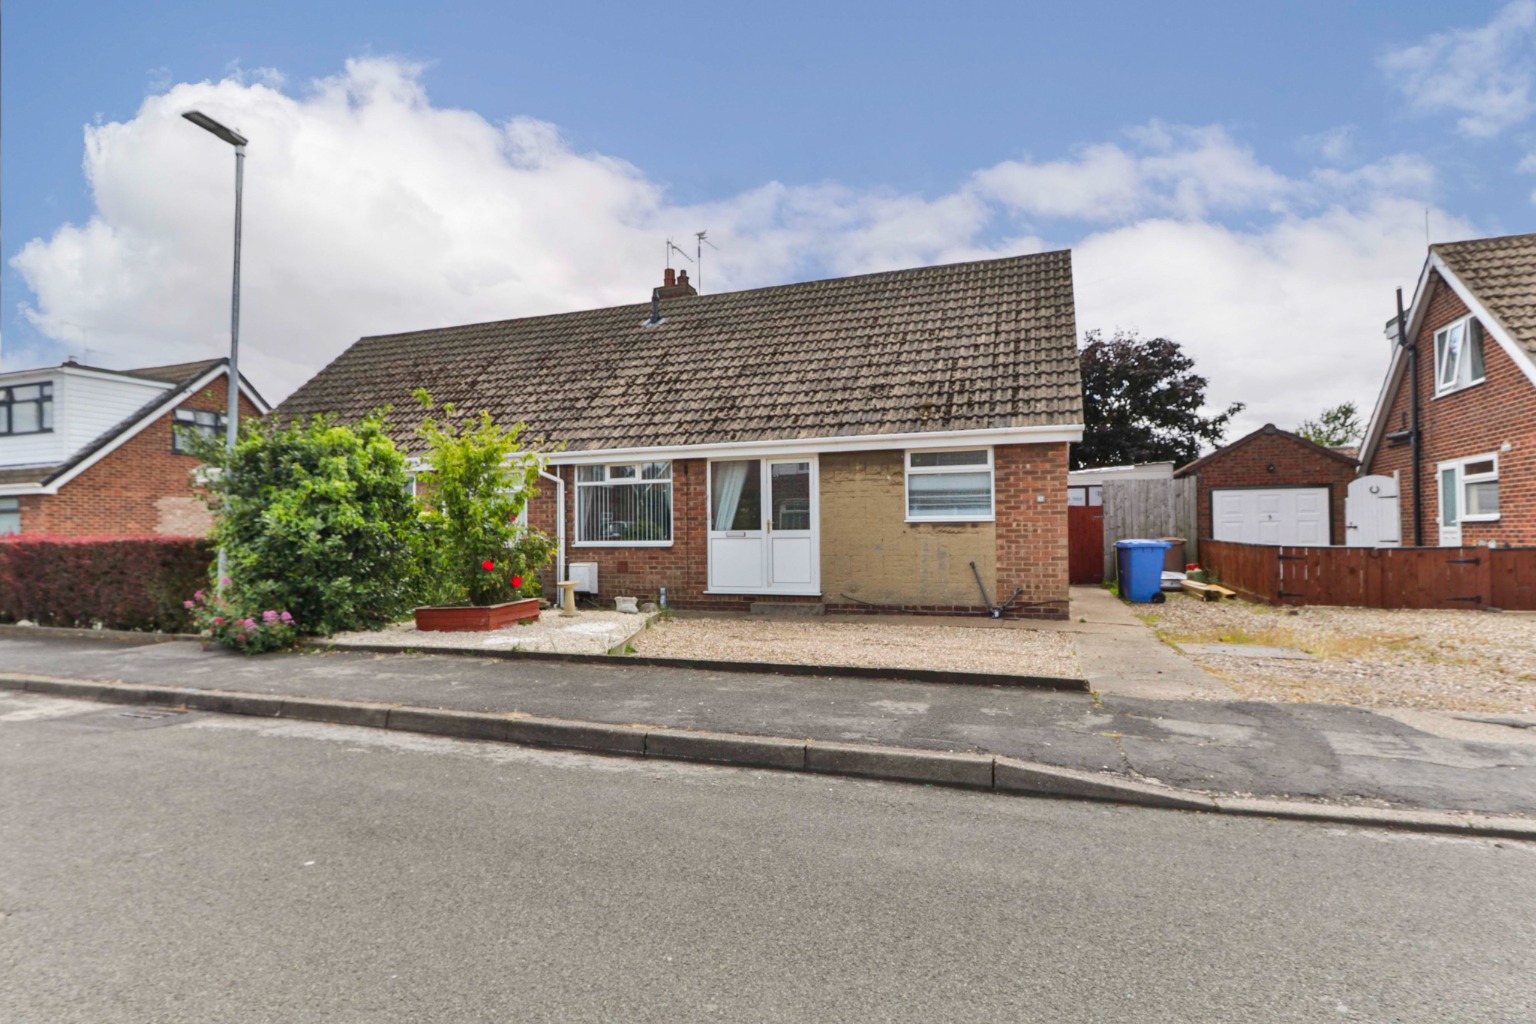 3 bed semi-detached bungalow for sale - Property Image 1